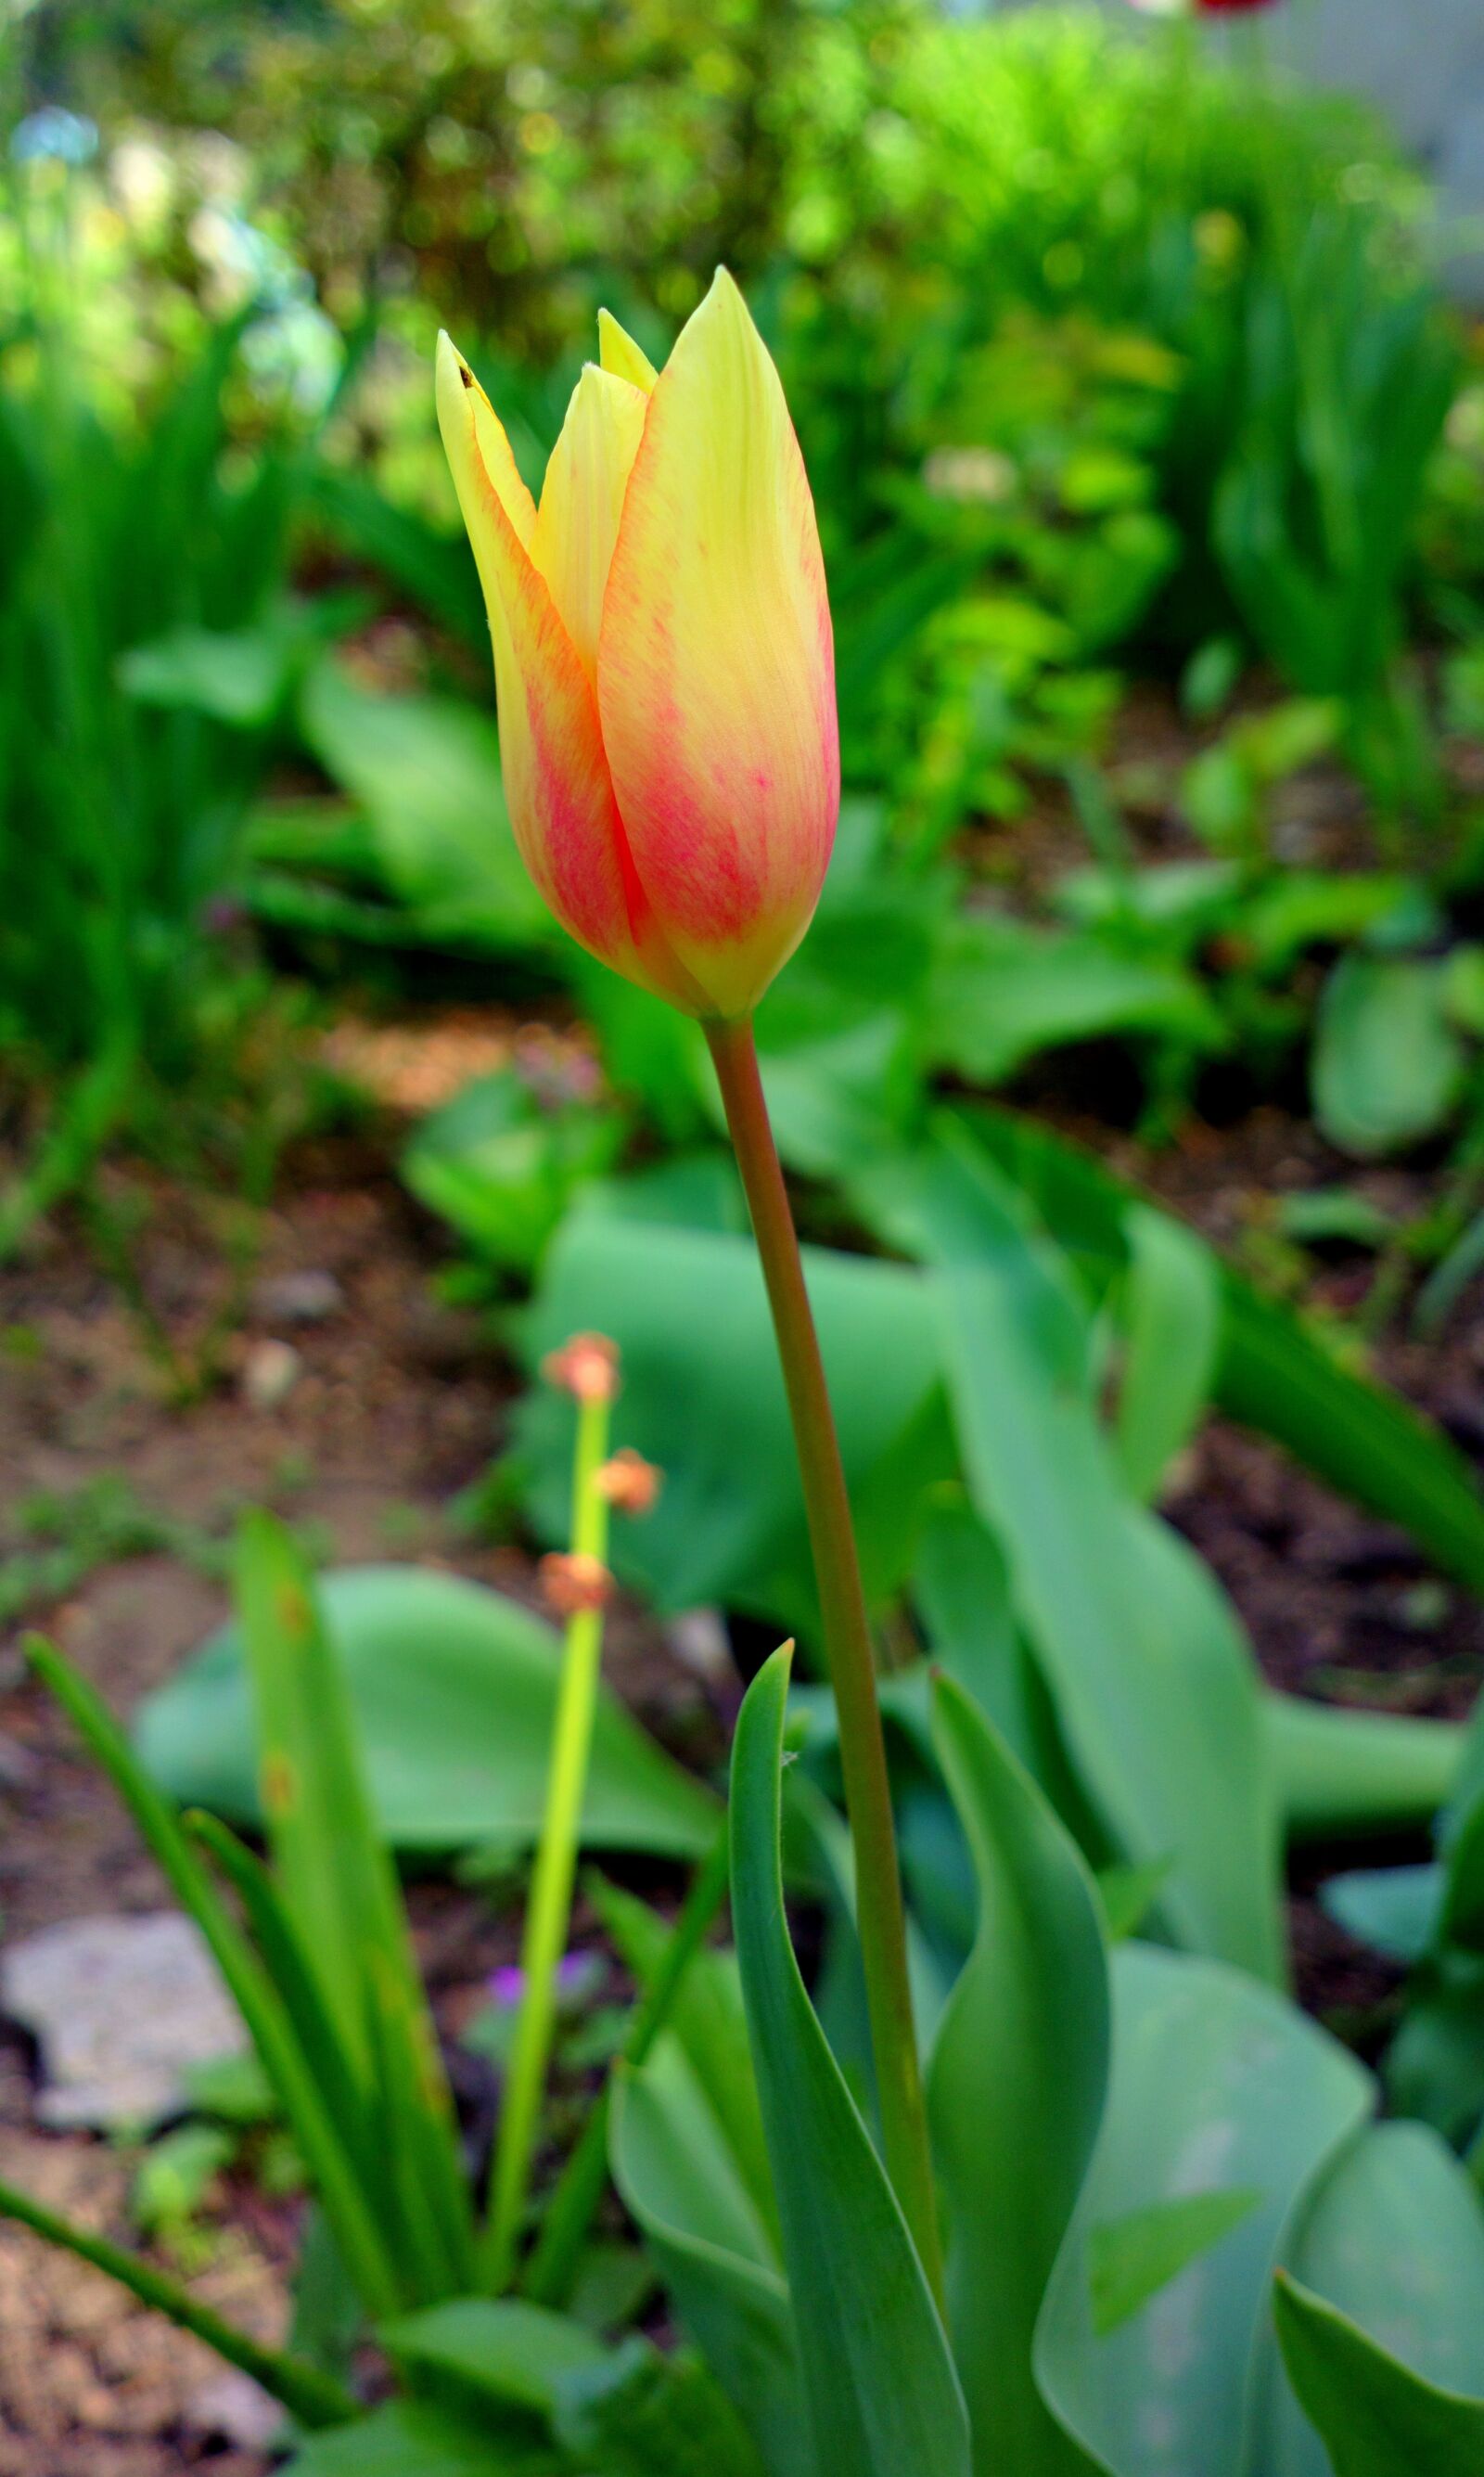 Nokia 808 PureView sample photo. Flower, tulip, tulips photography